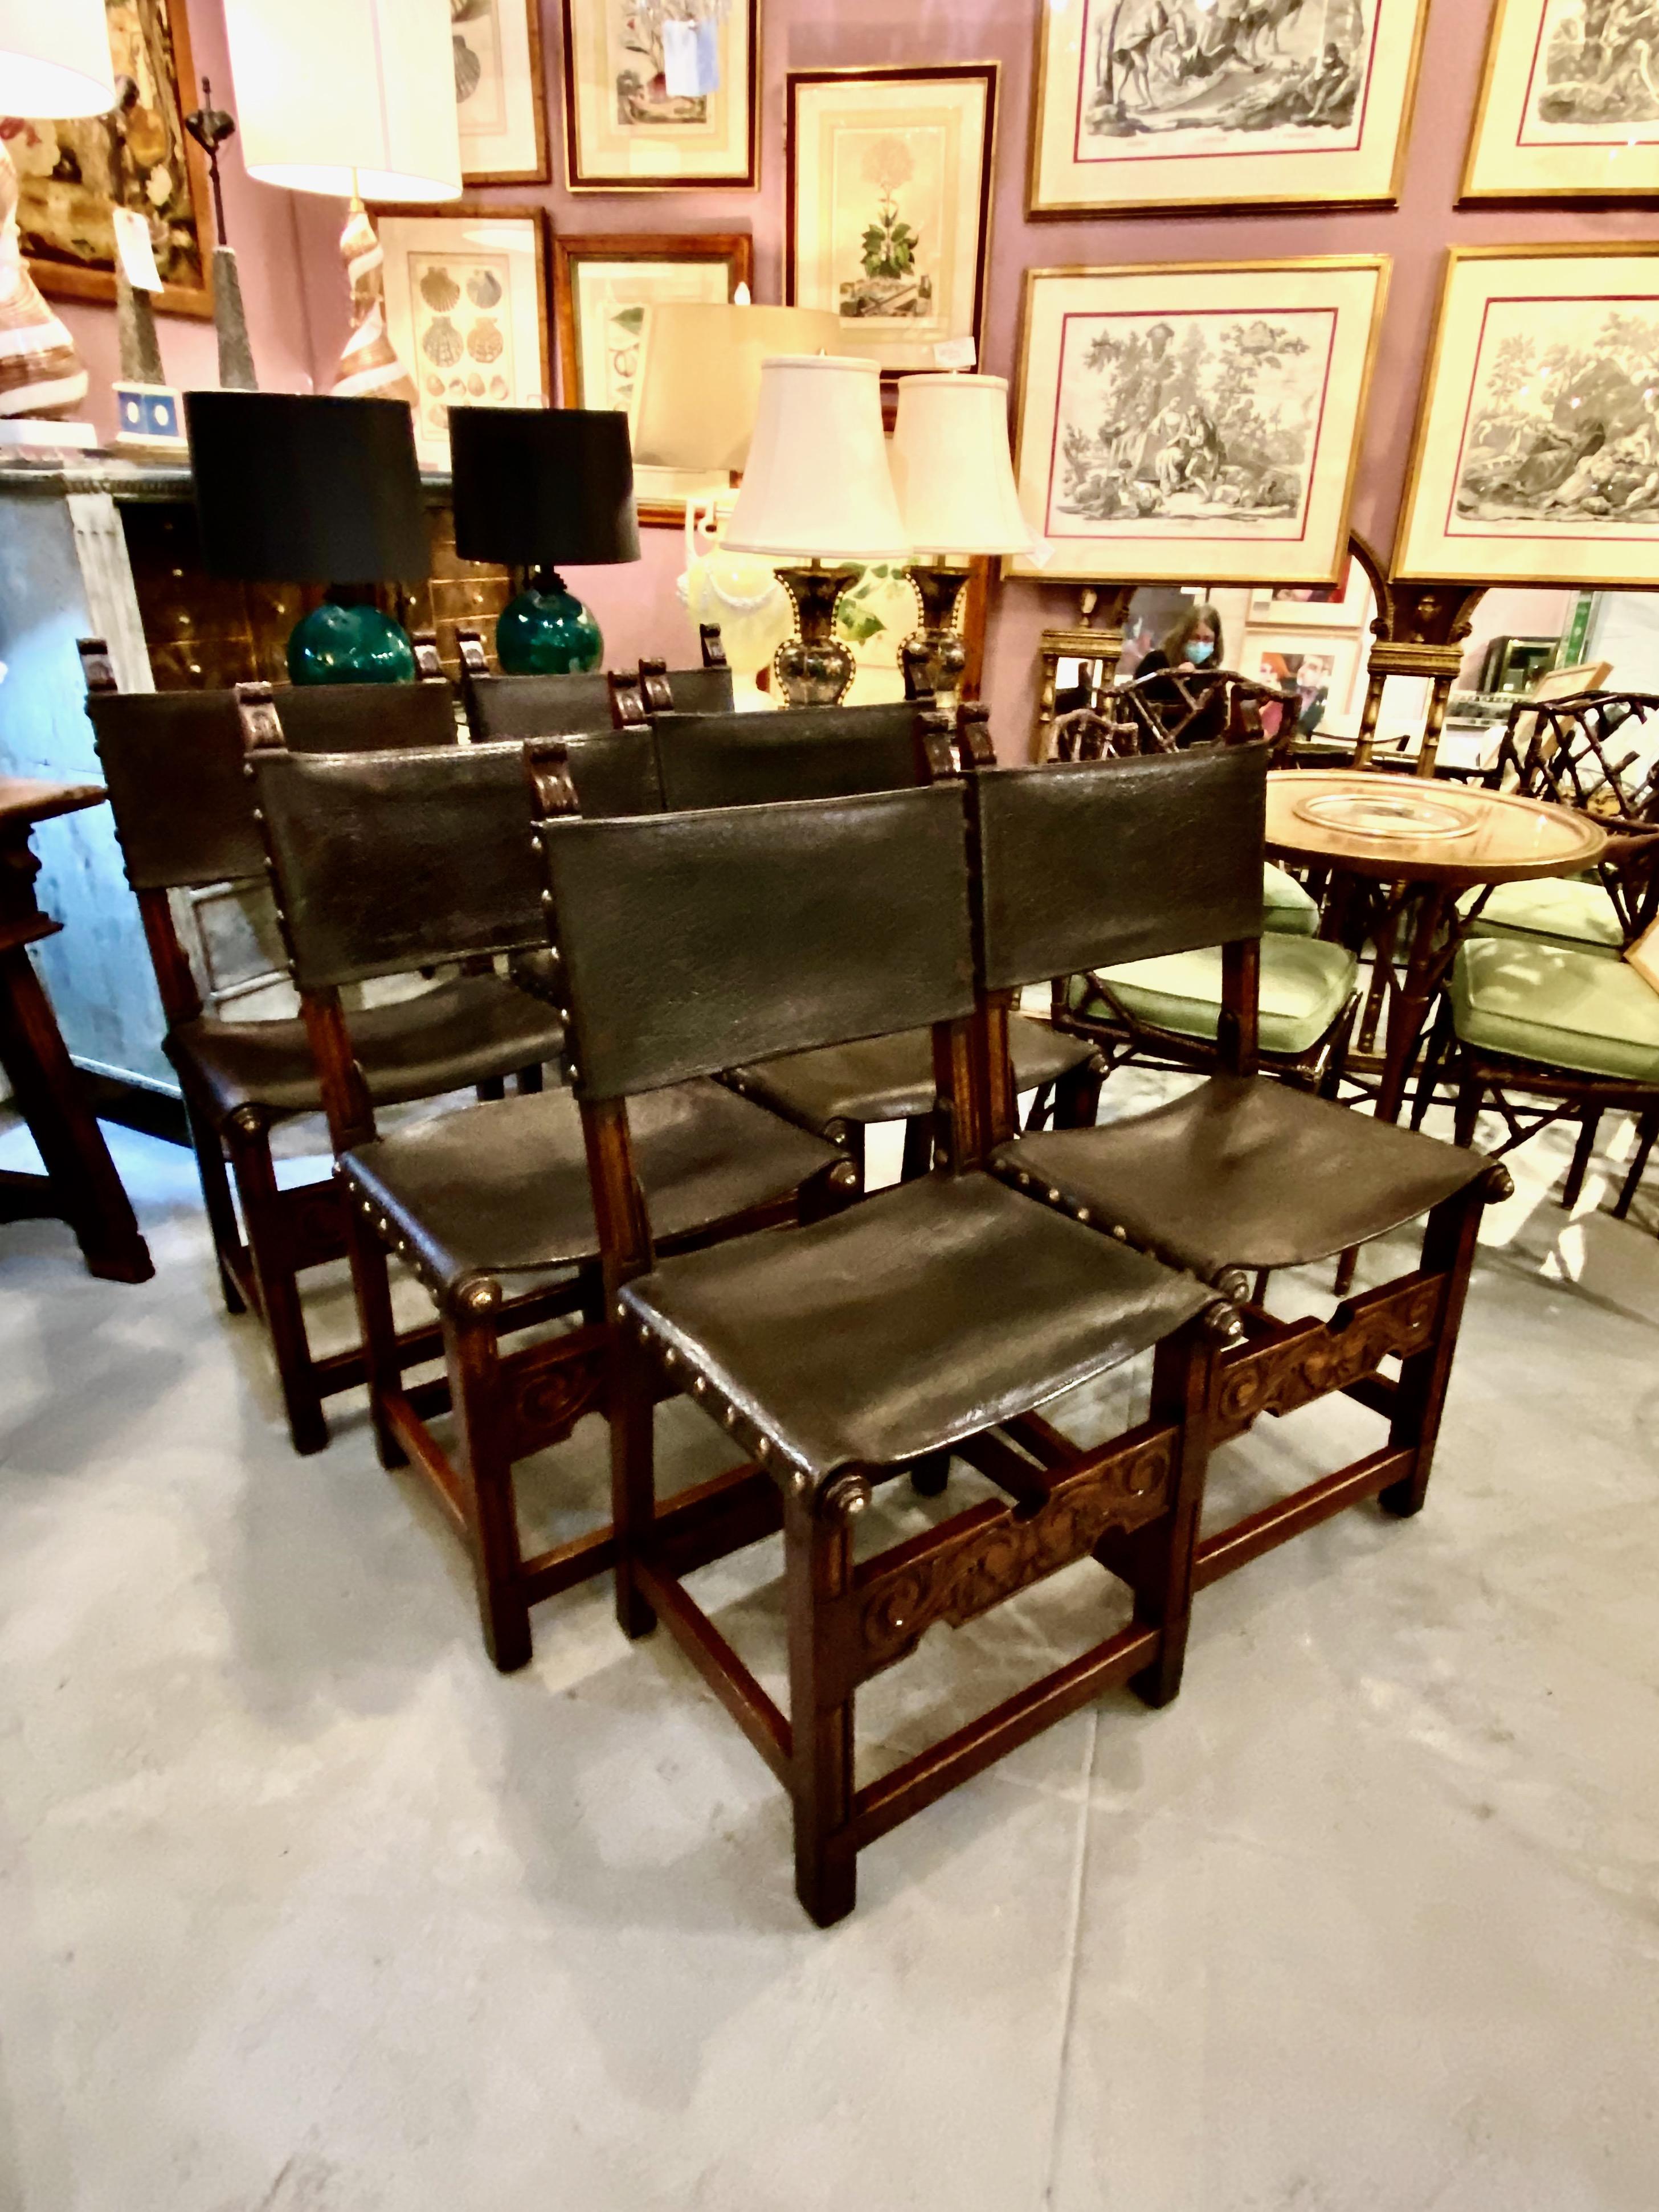 This is an unusual set of six antique Spanish early 20th century carved oak and saddle leather dining chairs. The chairs appear to be in original condition--the leather is very sturdy and has acquired a desirable deep natural patina. The large brass